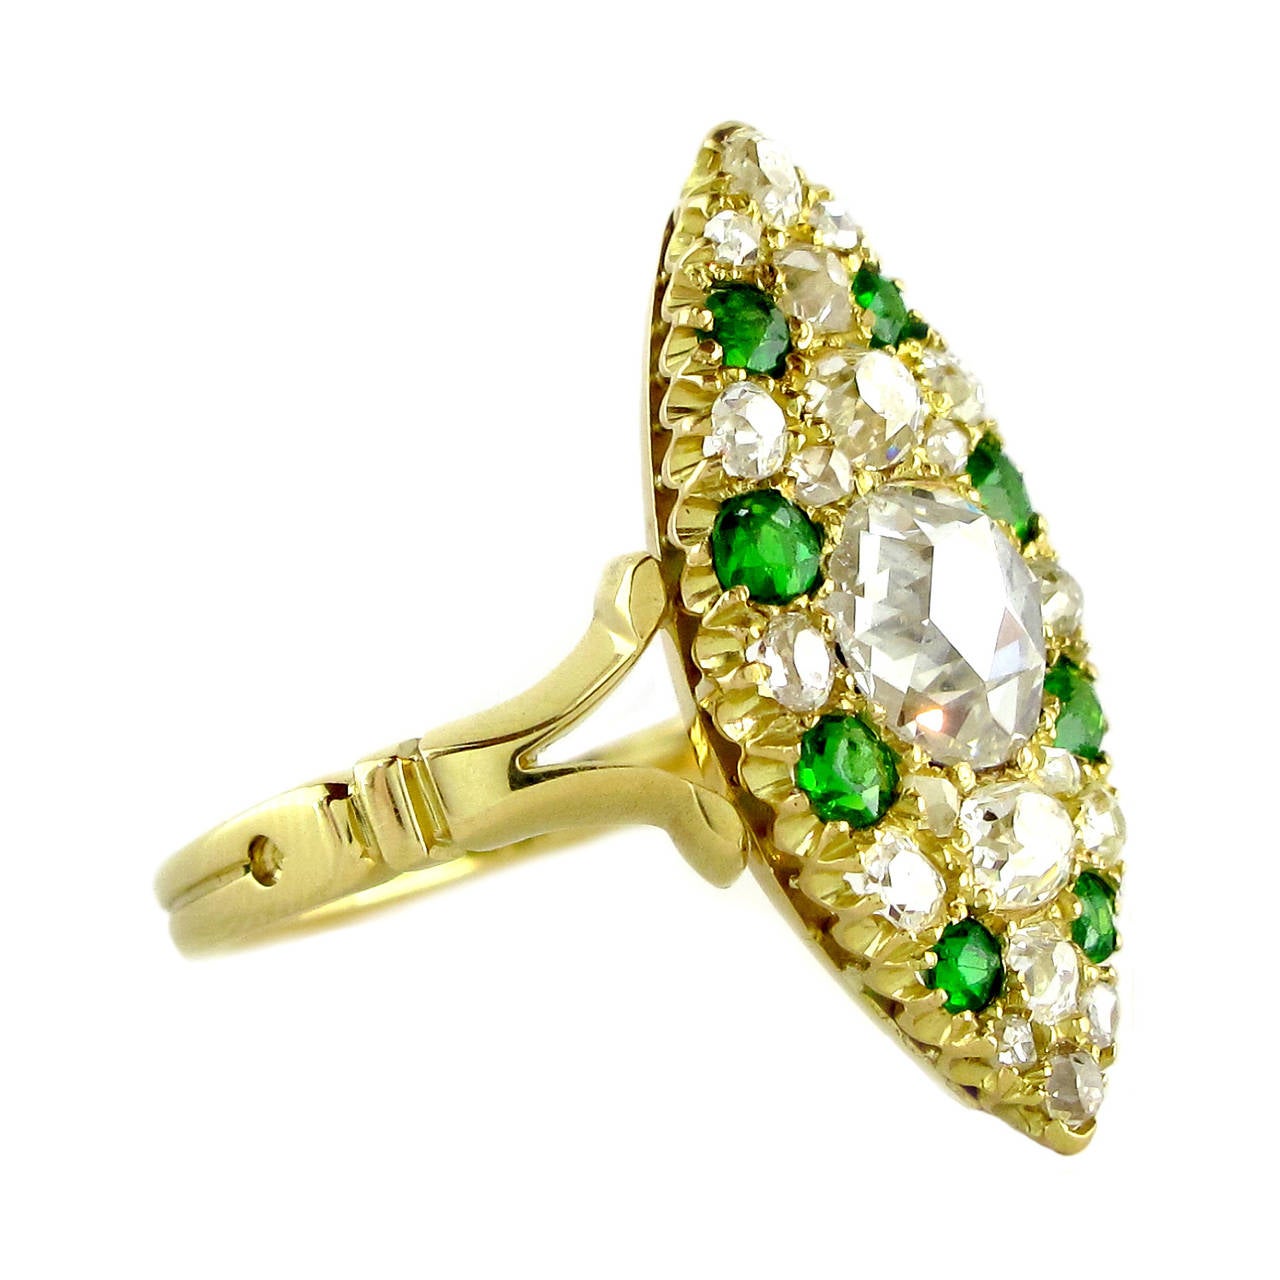 A Victorian diamond and demantoid garnet marquise/navette shaped panel ring, circa 1890. Comprising a central rose cut diamond, estimated to weigh 0.56 carats, set within a twenty-eight stone diamond and demantoid garnet surround. The stones are